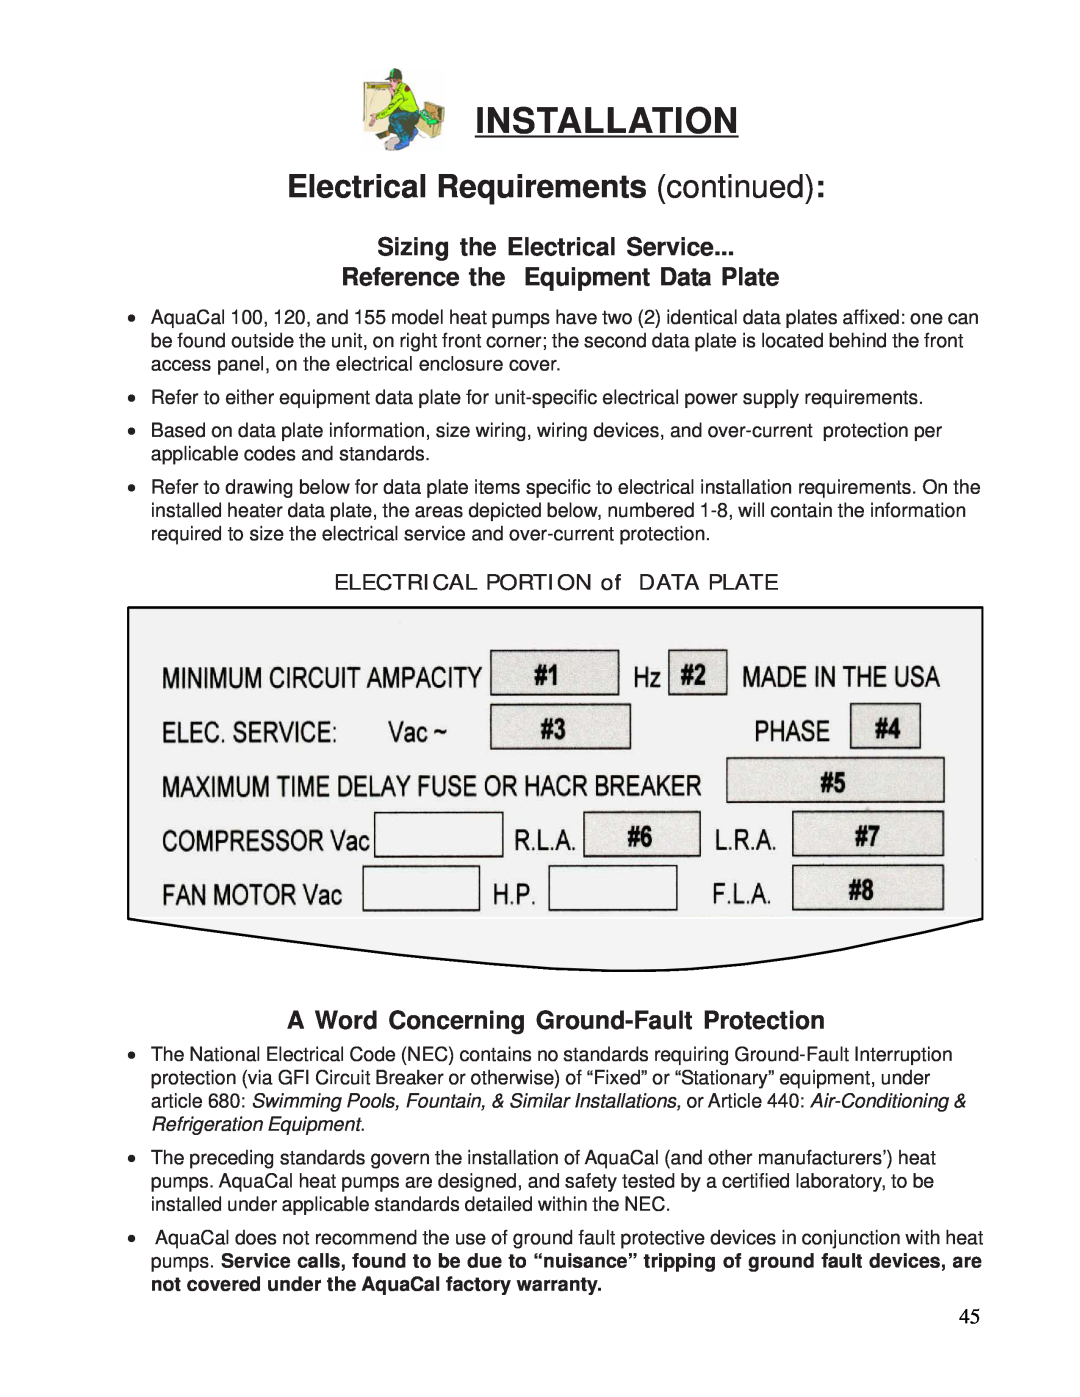 Aquacal 100 Electrical Requirements continued, Sizing the Electrical Service, Reference the Equipment Data Plate 